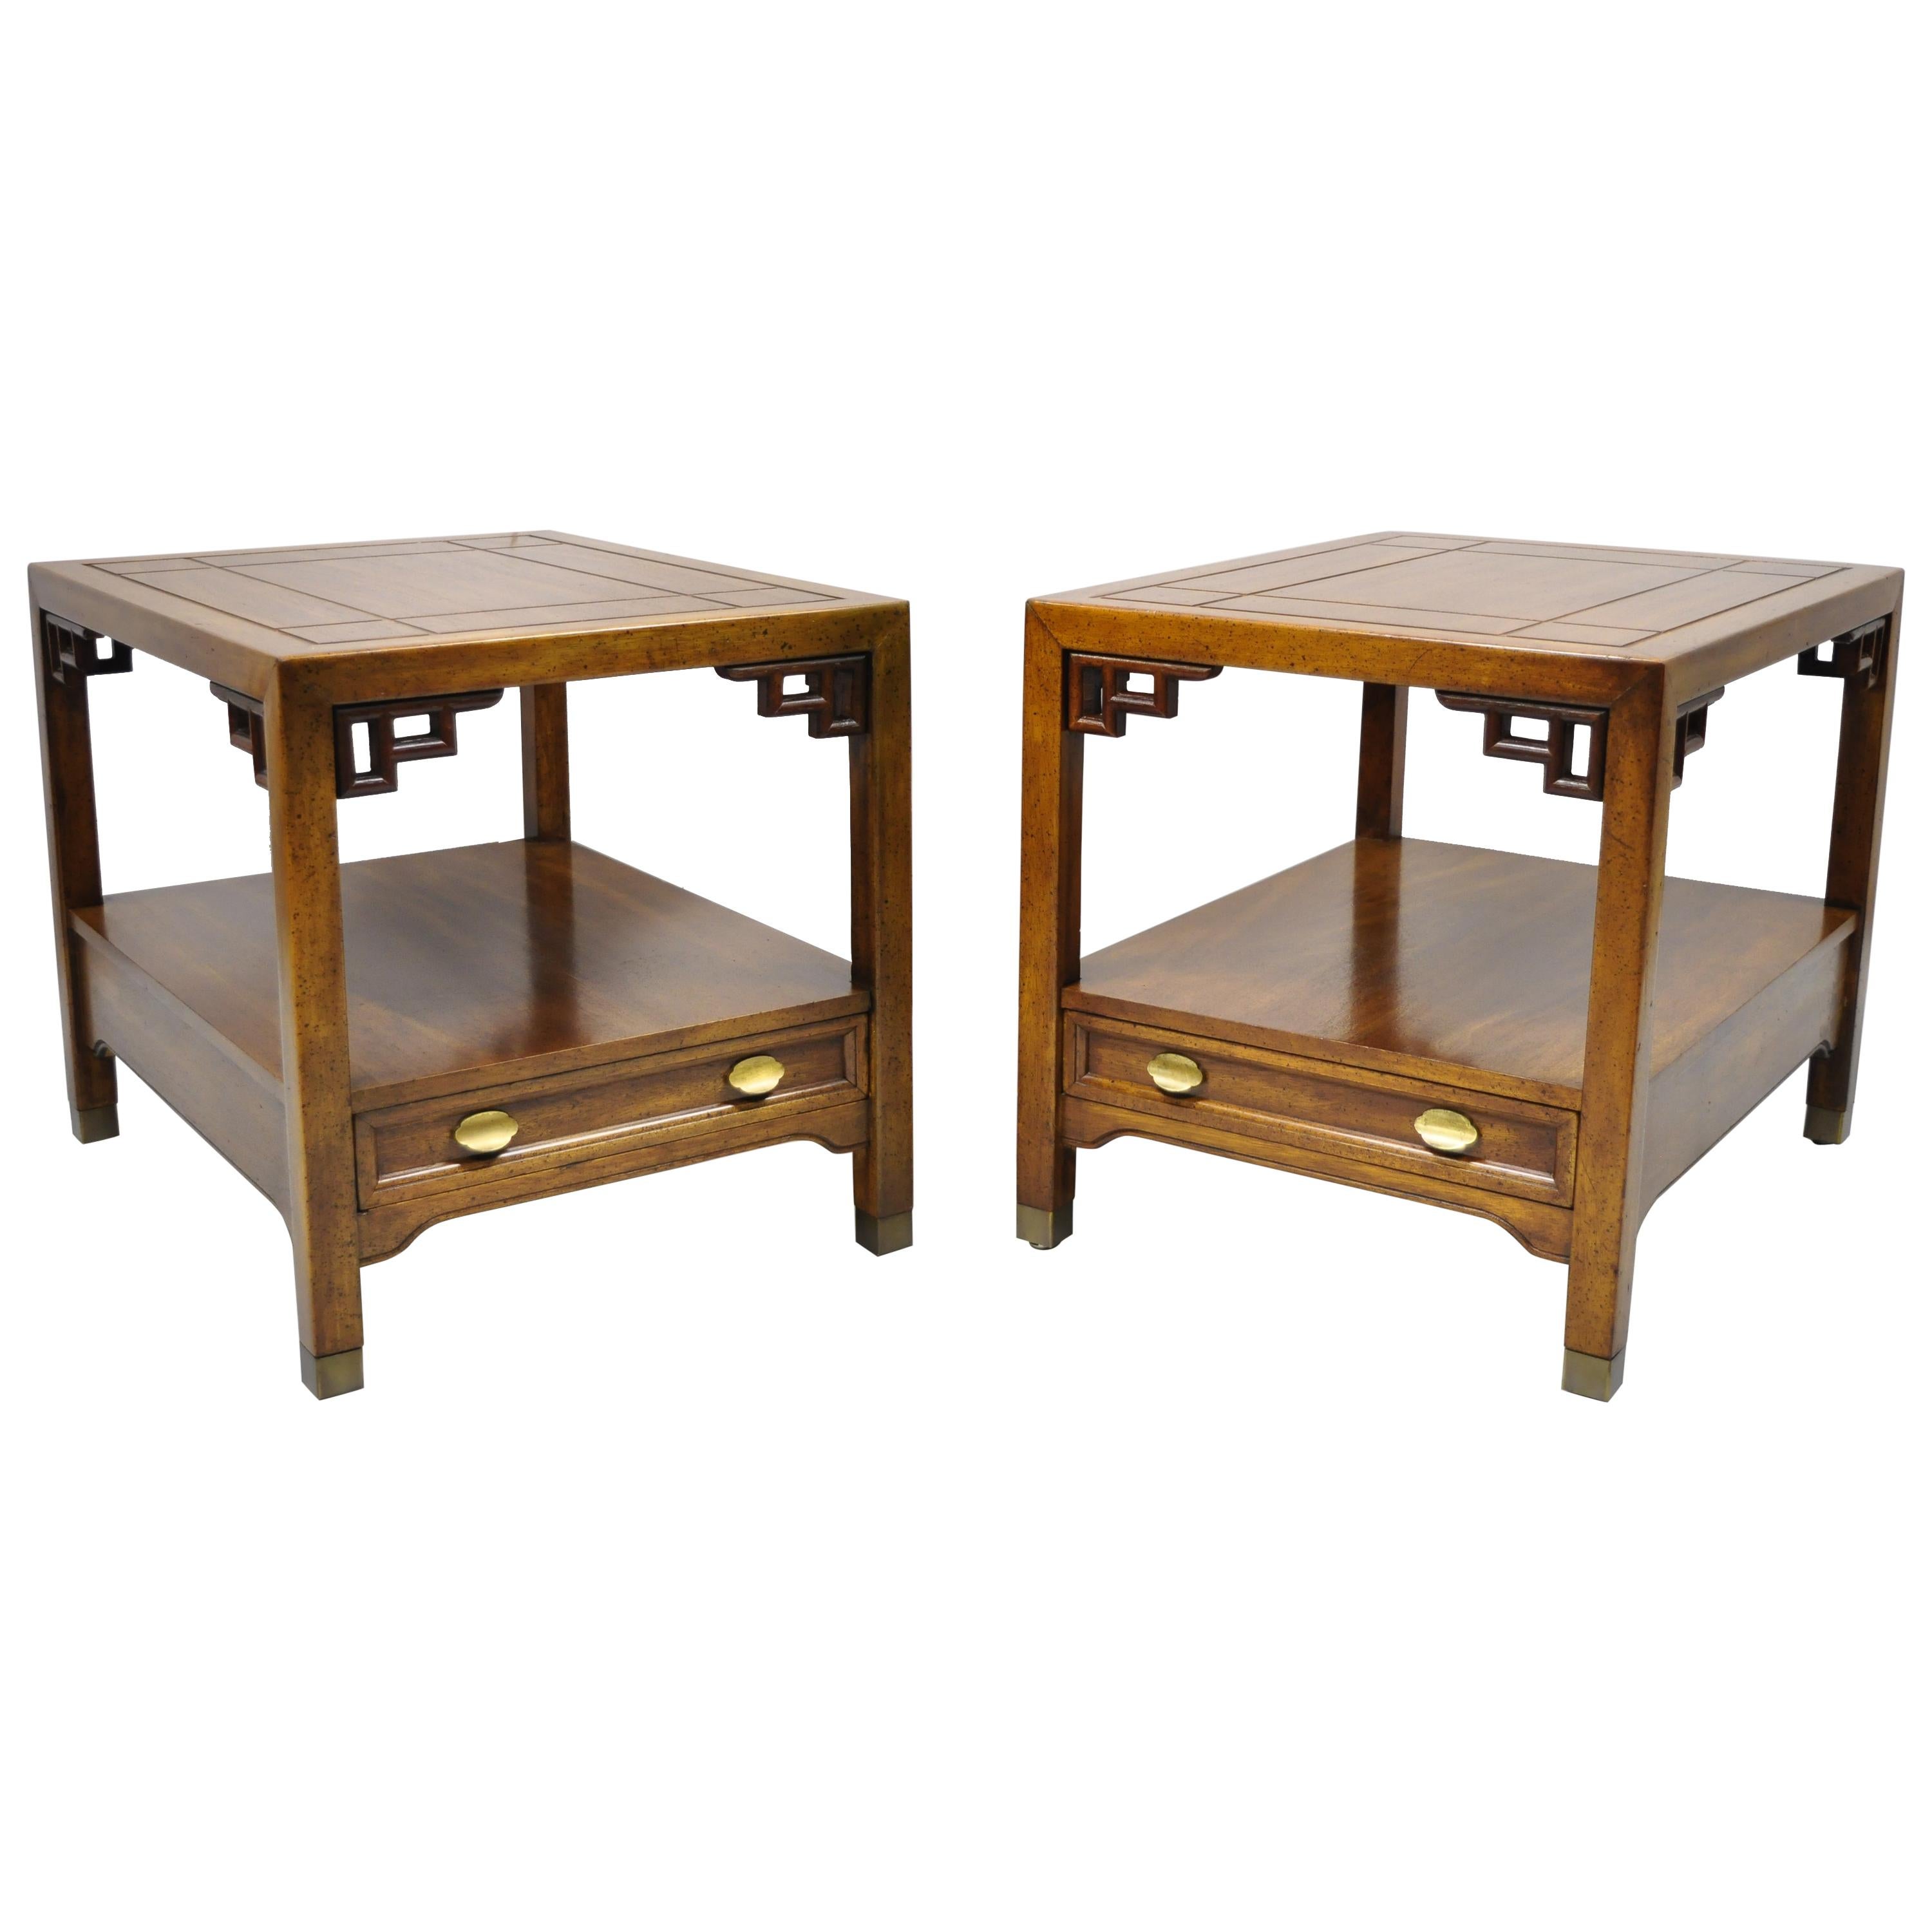 Century Furniture Chinoiserie Fretwork Wooden Side Lamp End Tables, a Pair